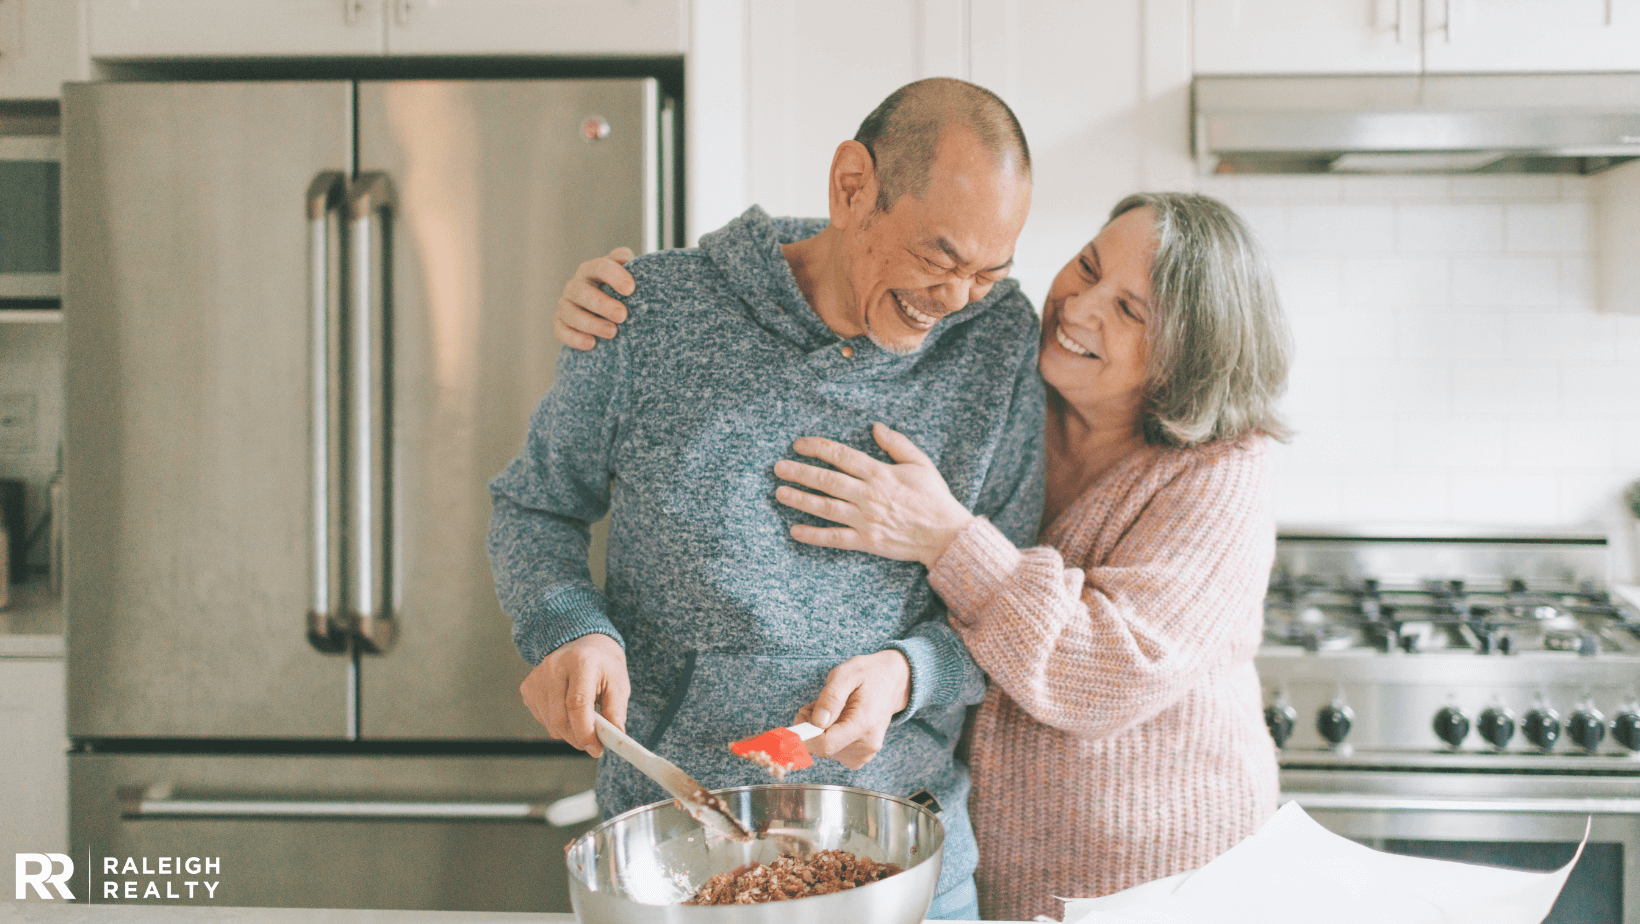 Kitchen safety tips for seniors and active adults